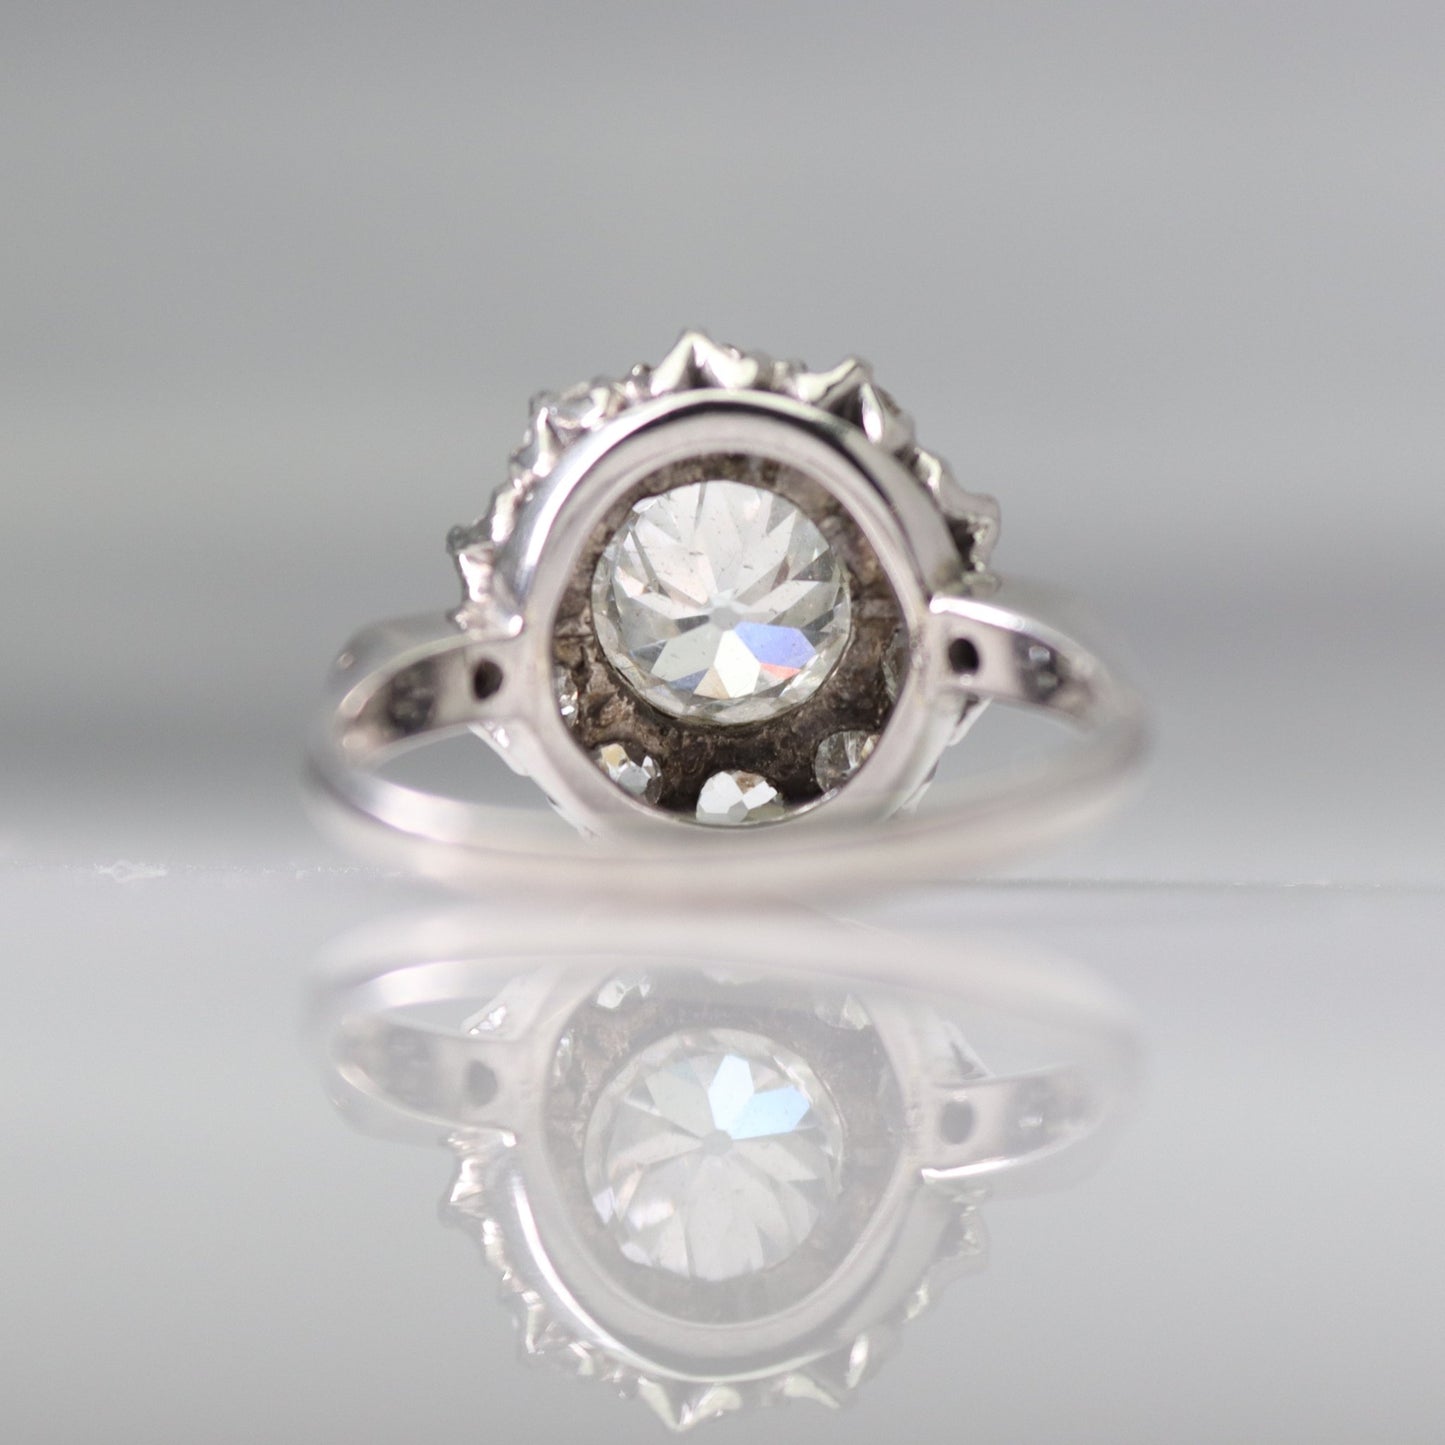 Vintage Diamond Cluster Ring - 2.20 Carats - Friar House